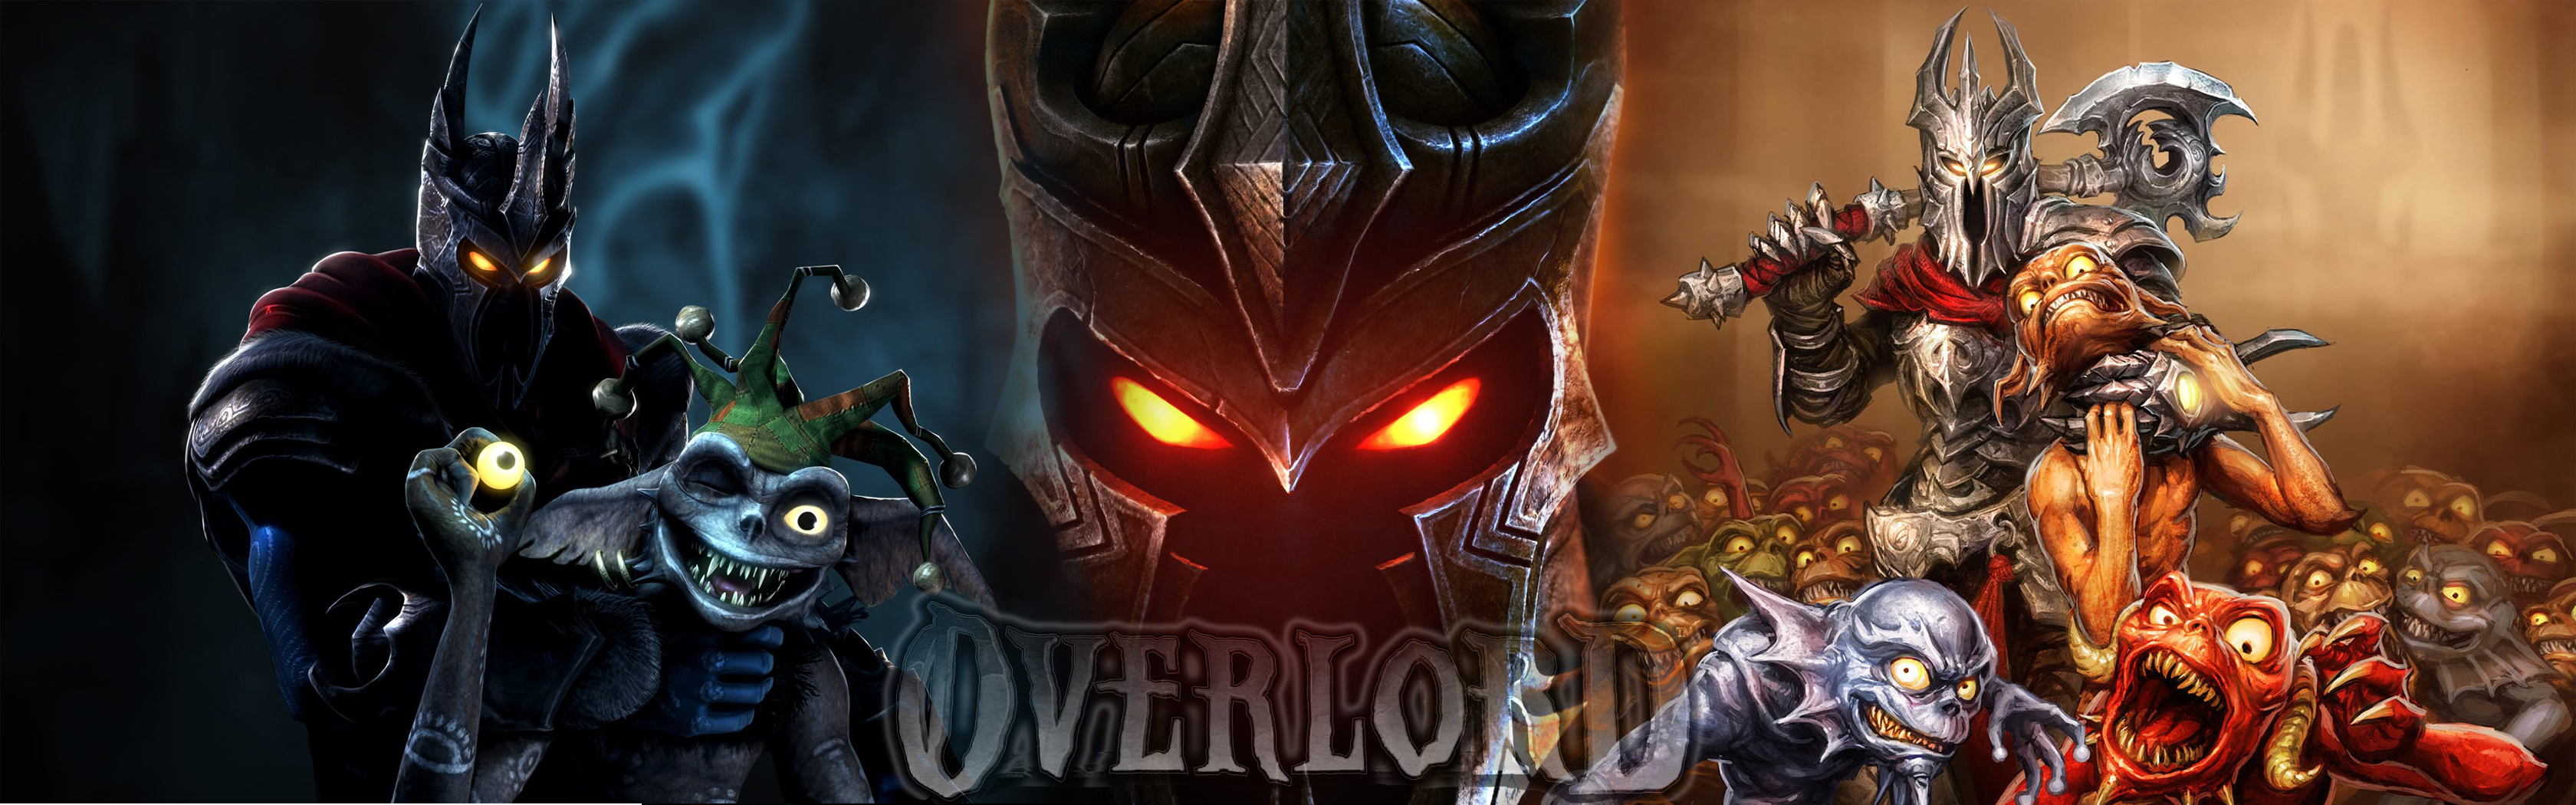 Video Game Overlord HD Wallpaper | Background Image